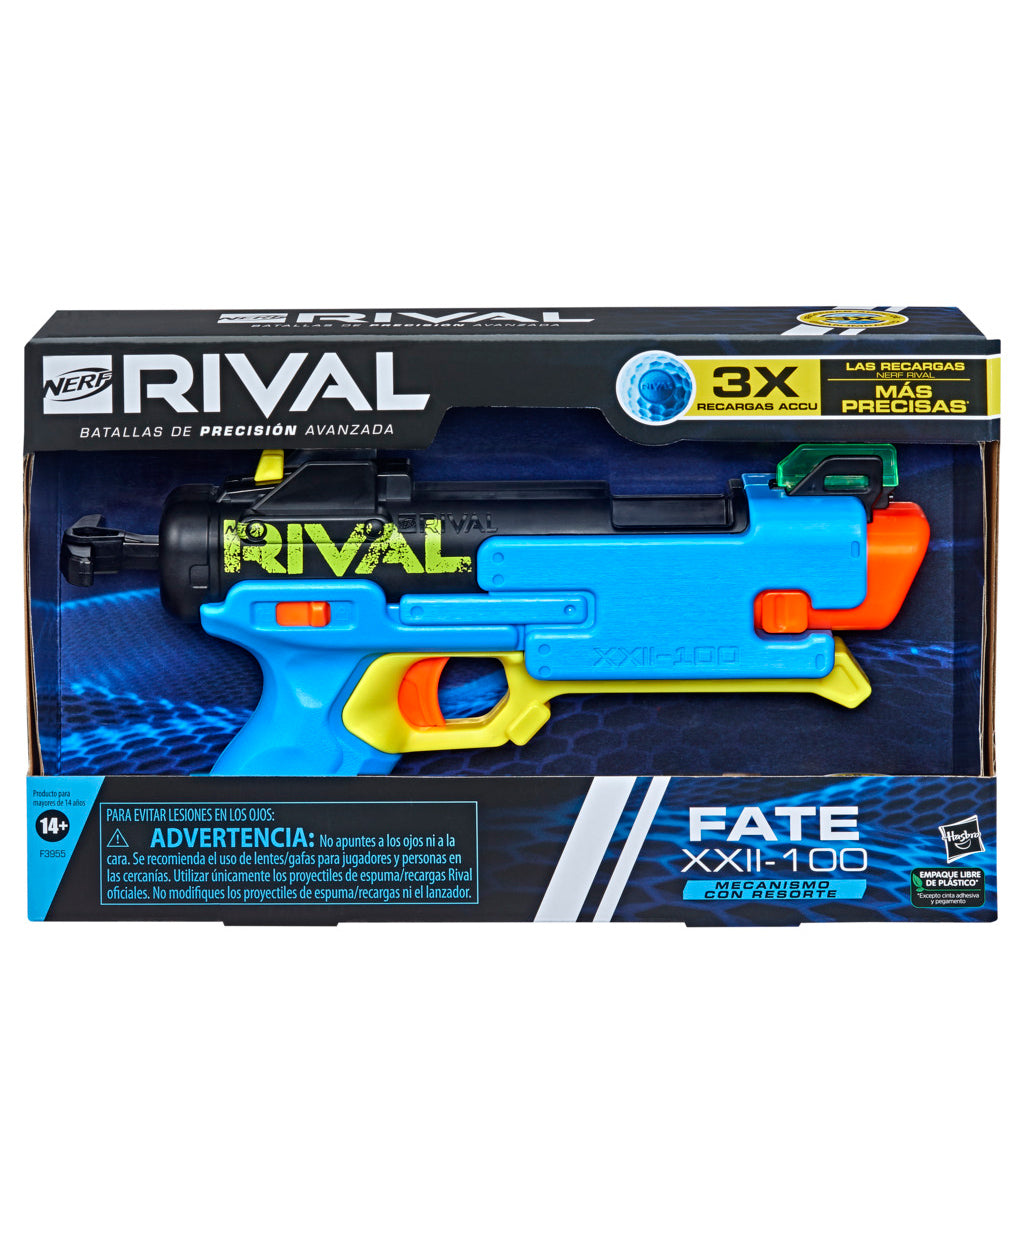 Nerf Rival Pilot XXIII-100 Toy Blaster with 2 Ball Dart Accu Rounds for  Ages 14 and Up 